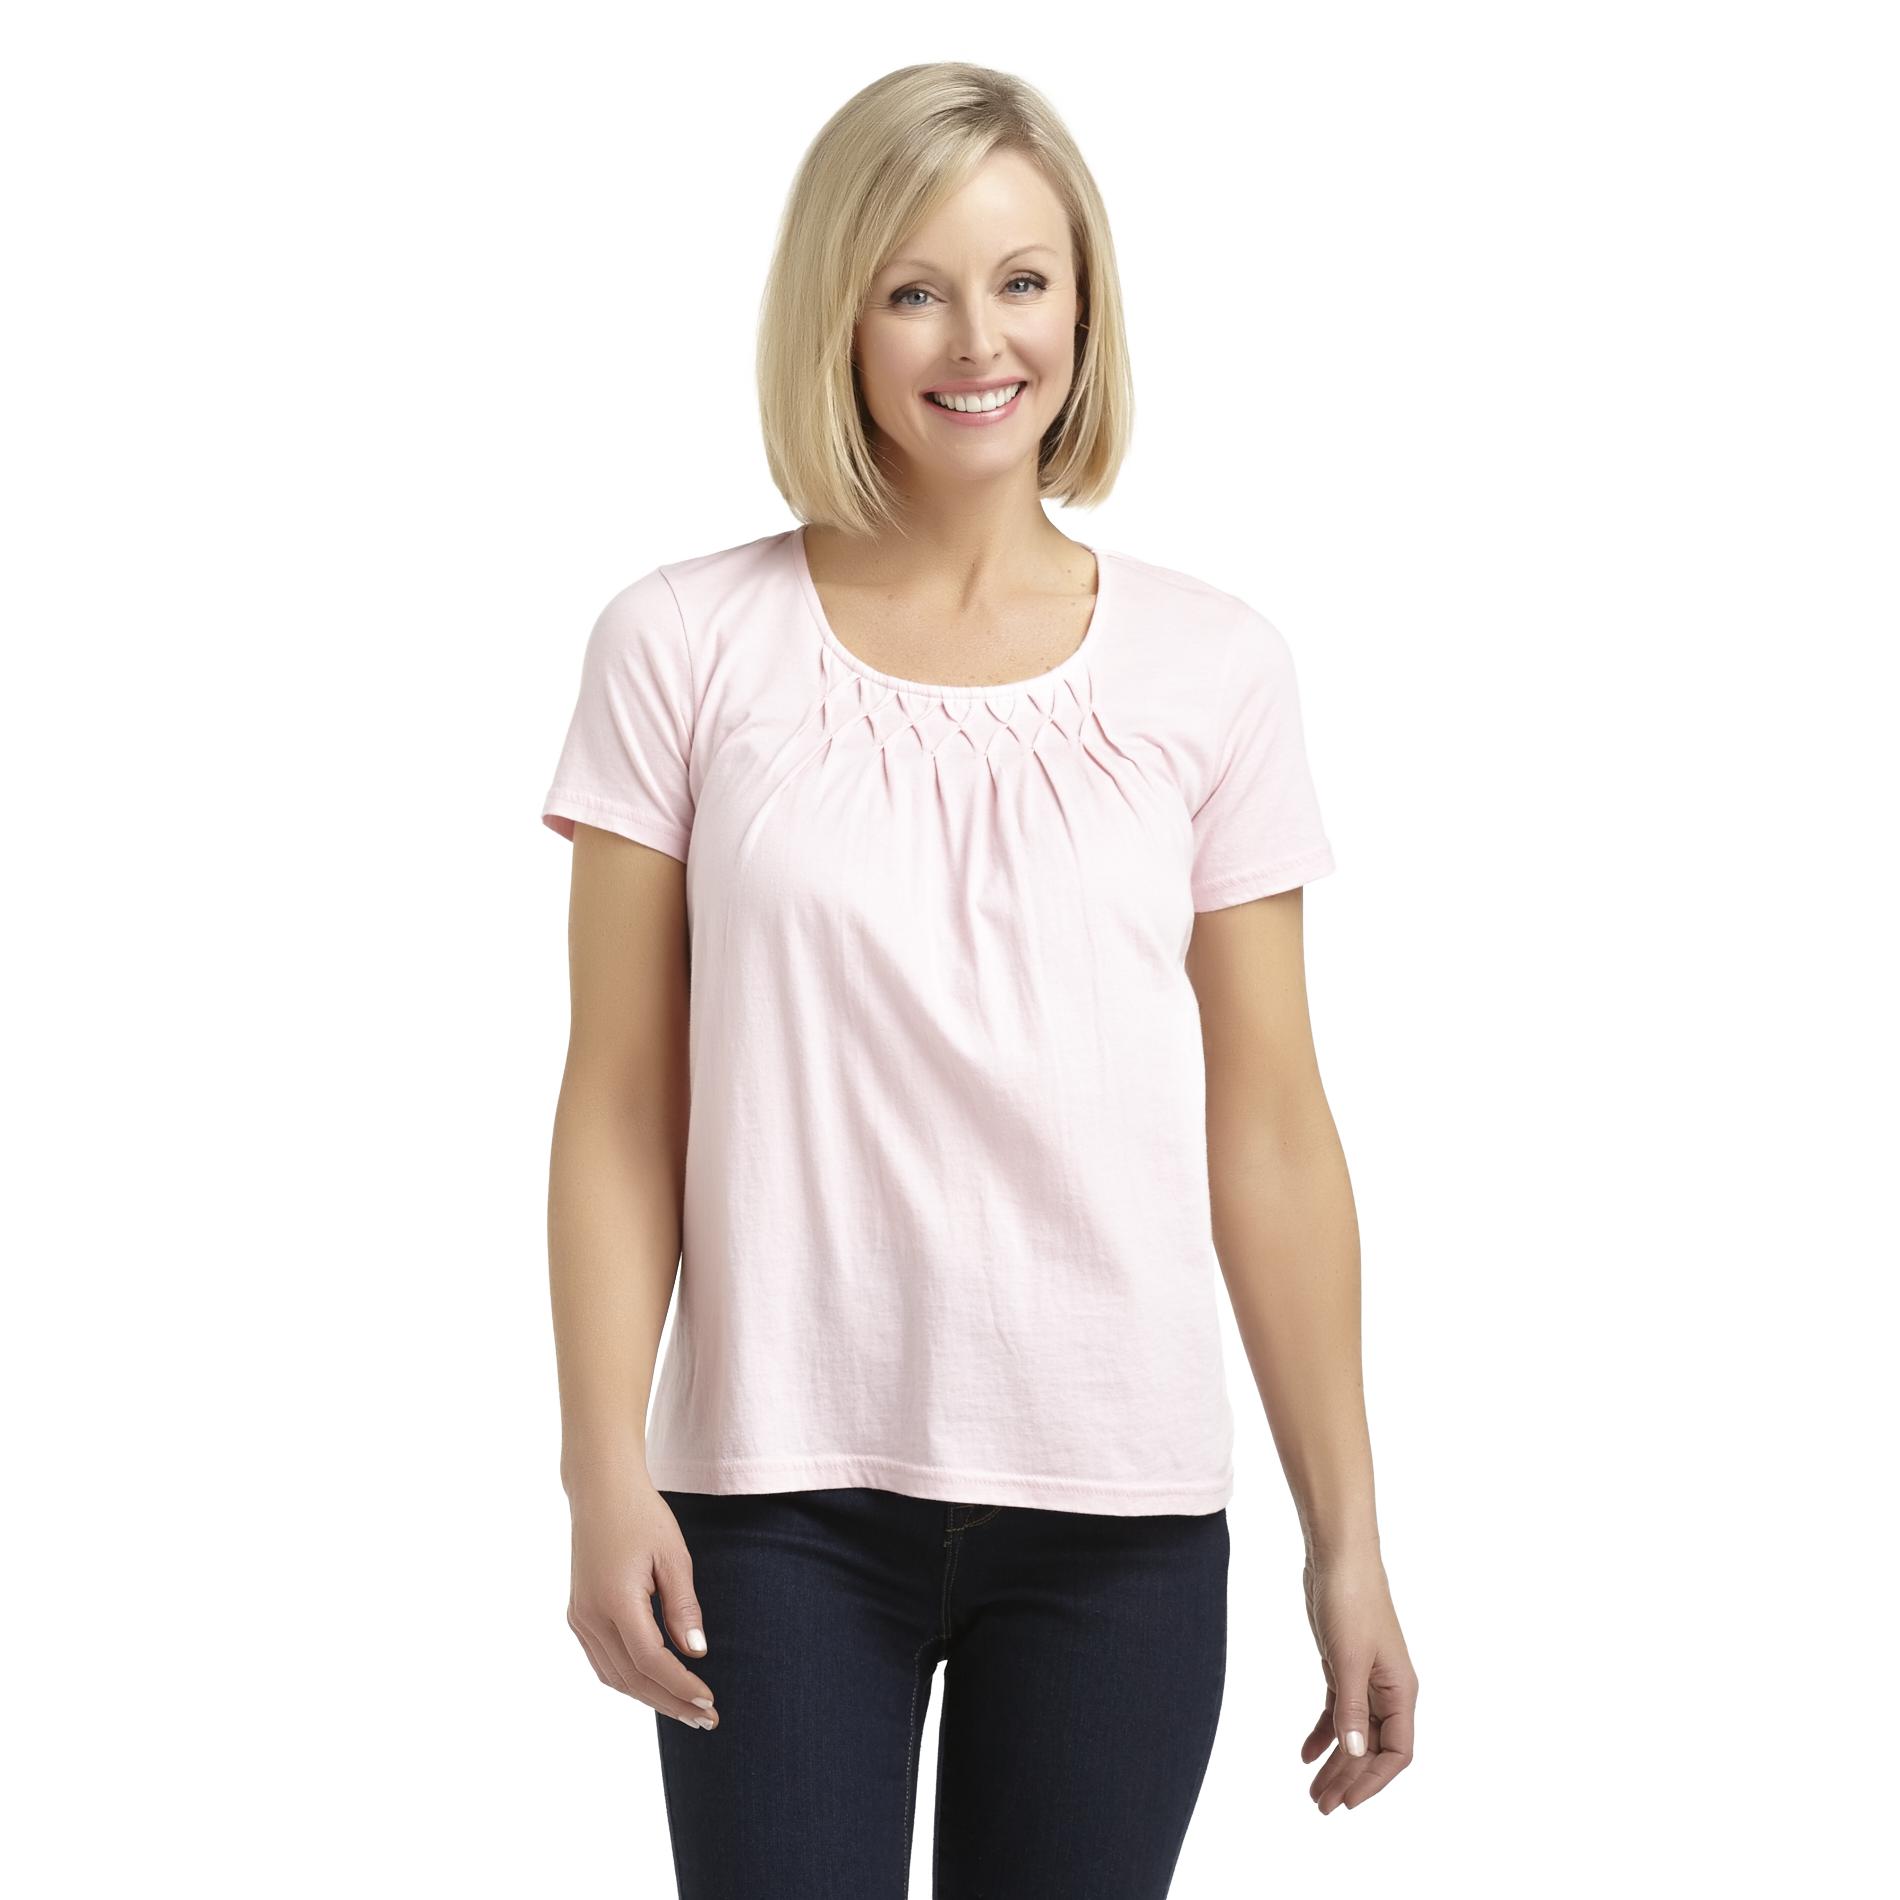 Basic Editions Women's Pleated Scoop Neck Top